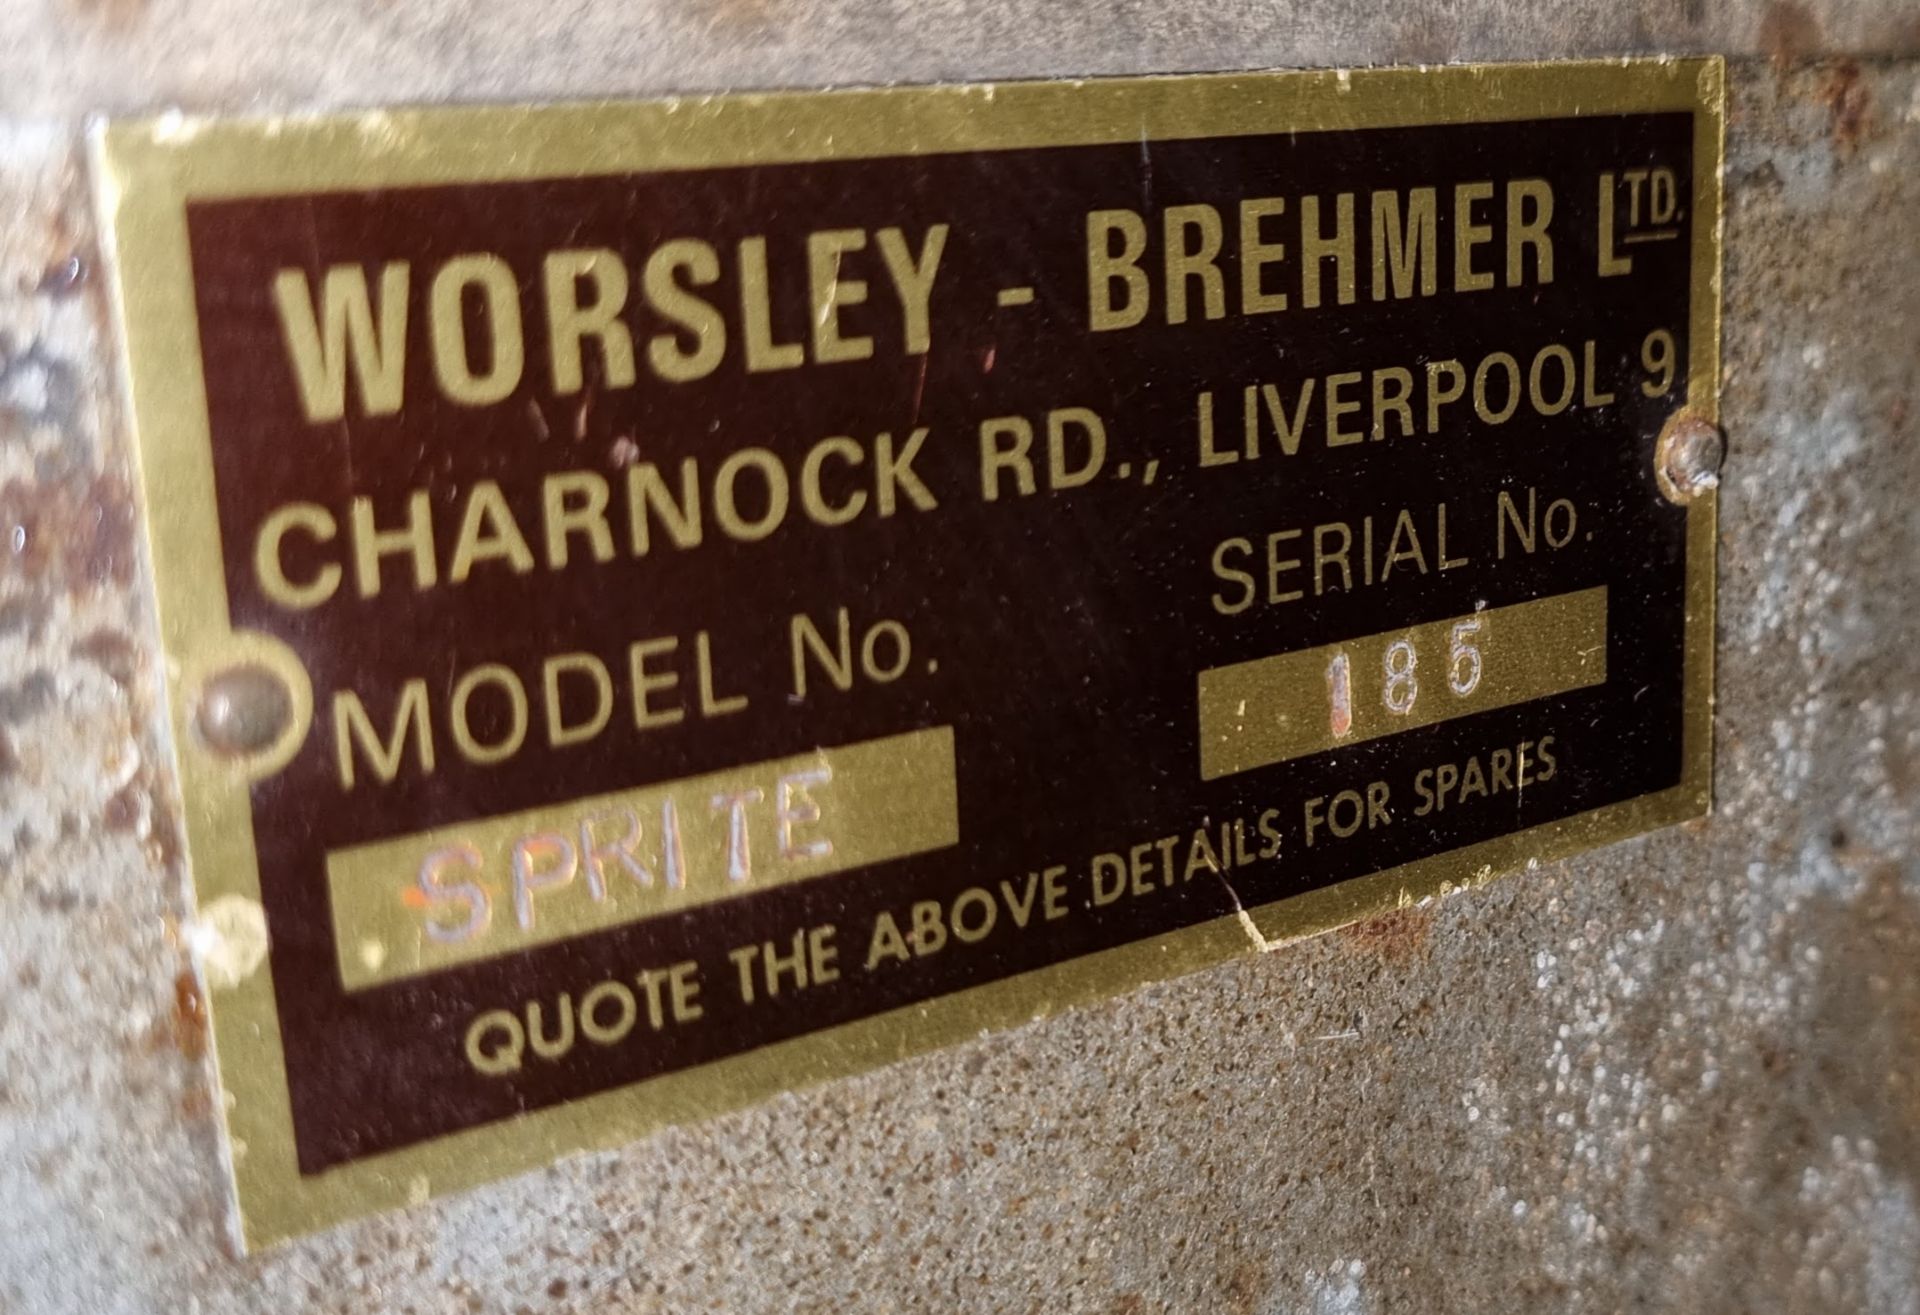 Worsley-Brehmer Sprite metal stitcher - serial number 185 with Brook Crompton Parkinson VPA534TF3B - Image 6 of 7